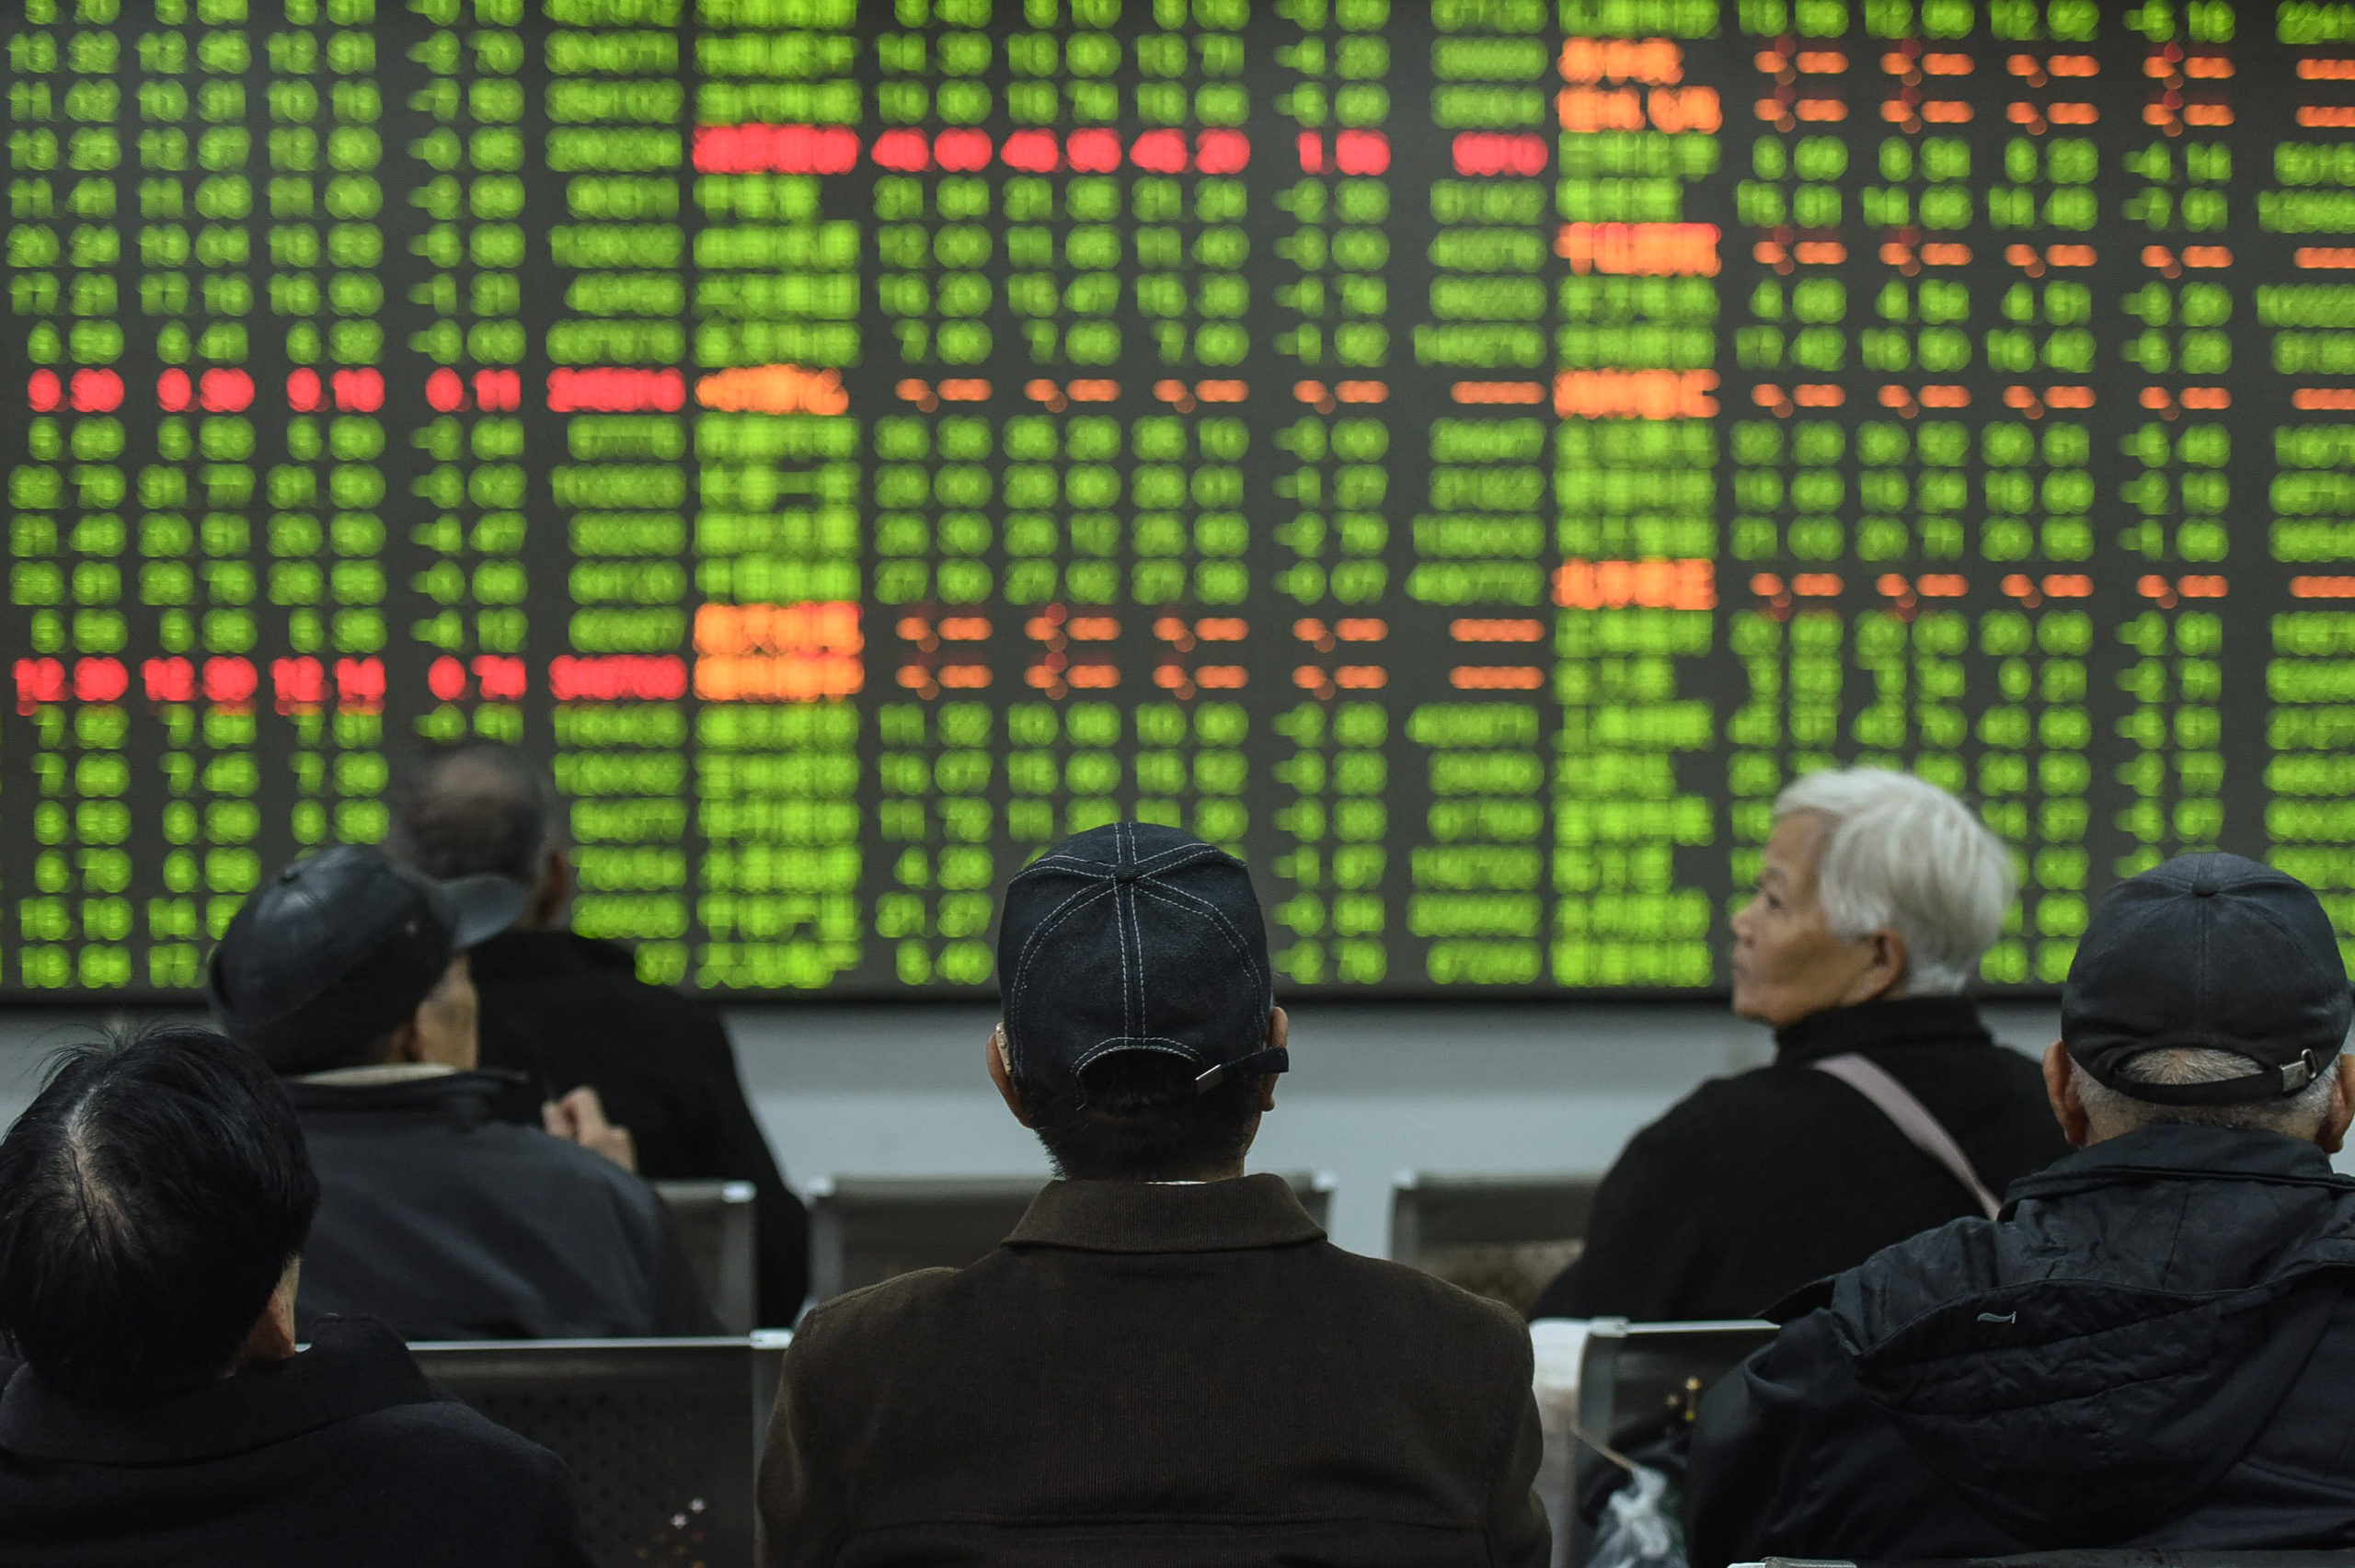 Chinese stocks crash as viral panic infects markets